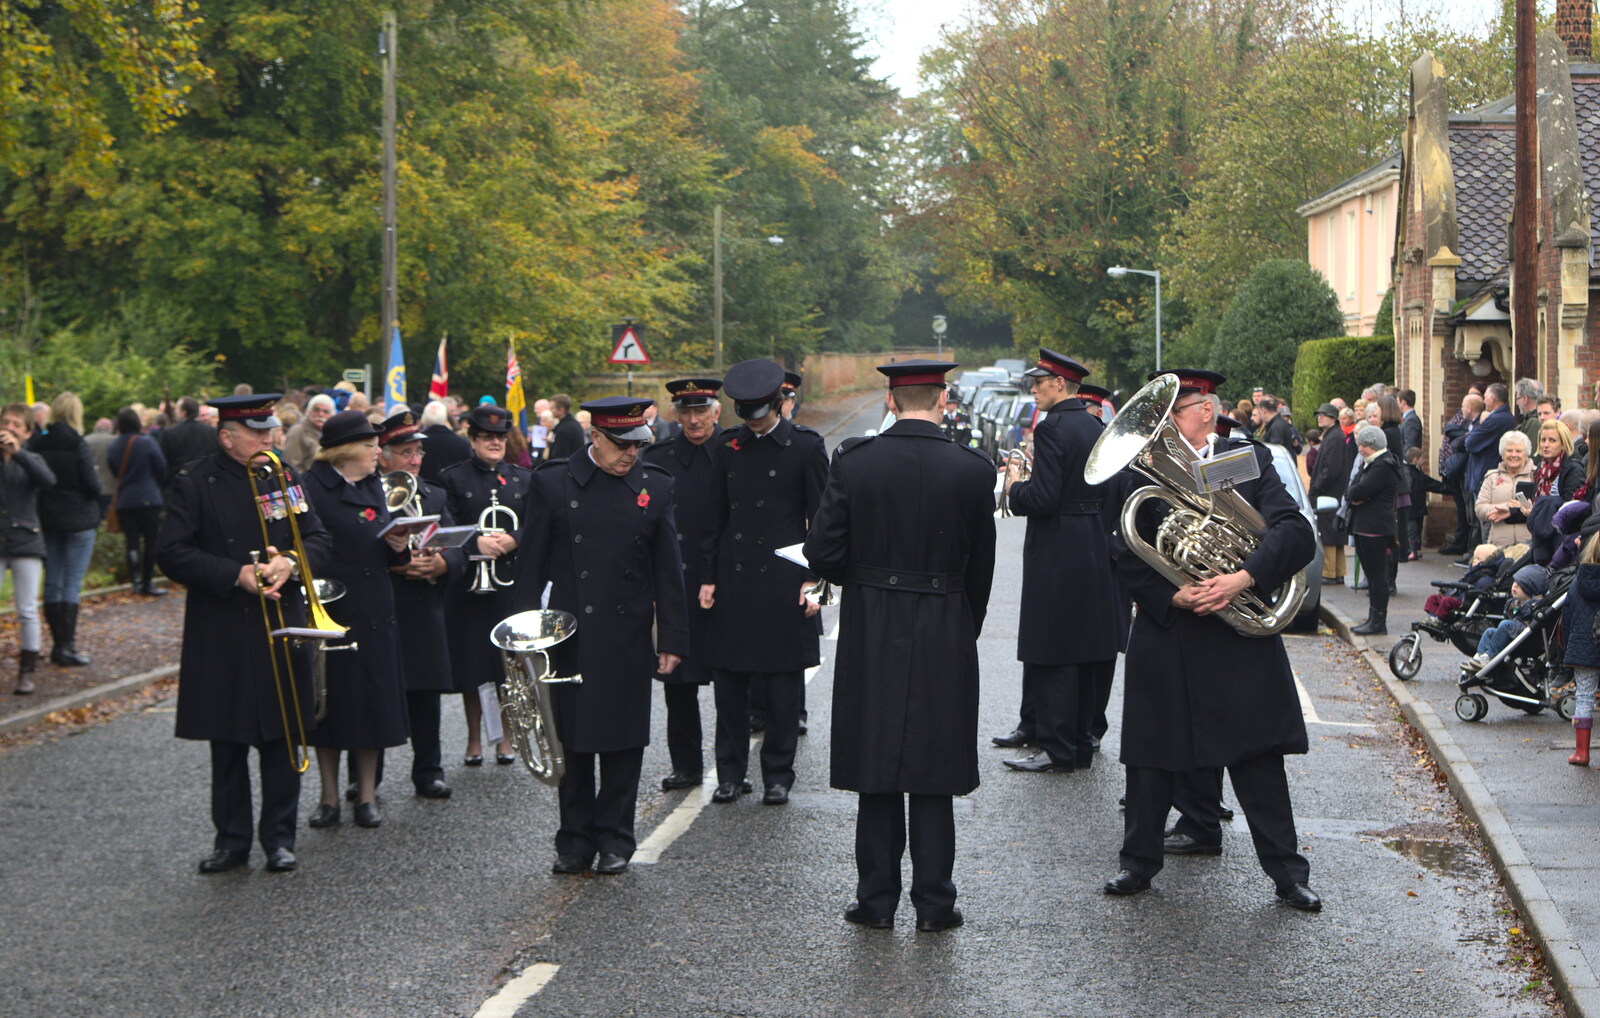 The band takes their place on Lambseth Street from A Remembrance Sunday Parade, Eye, Suffolk - 9th November 2014